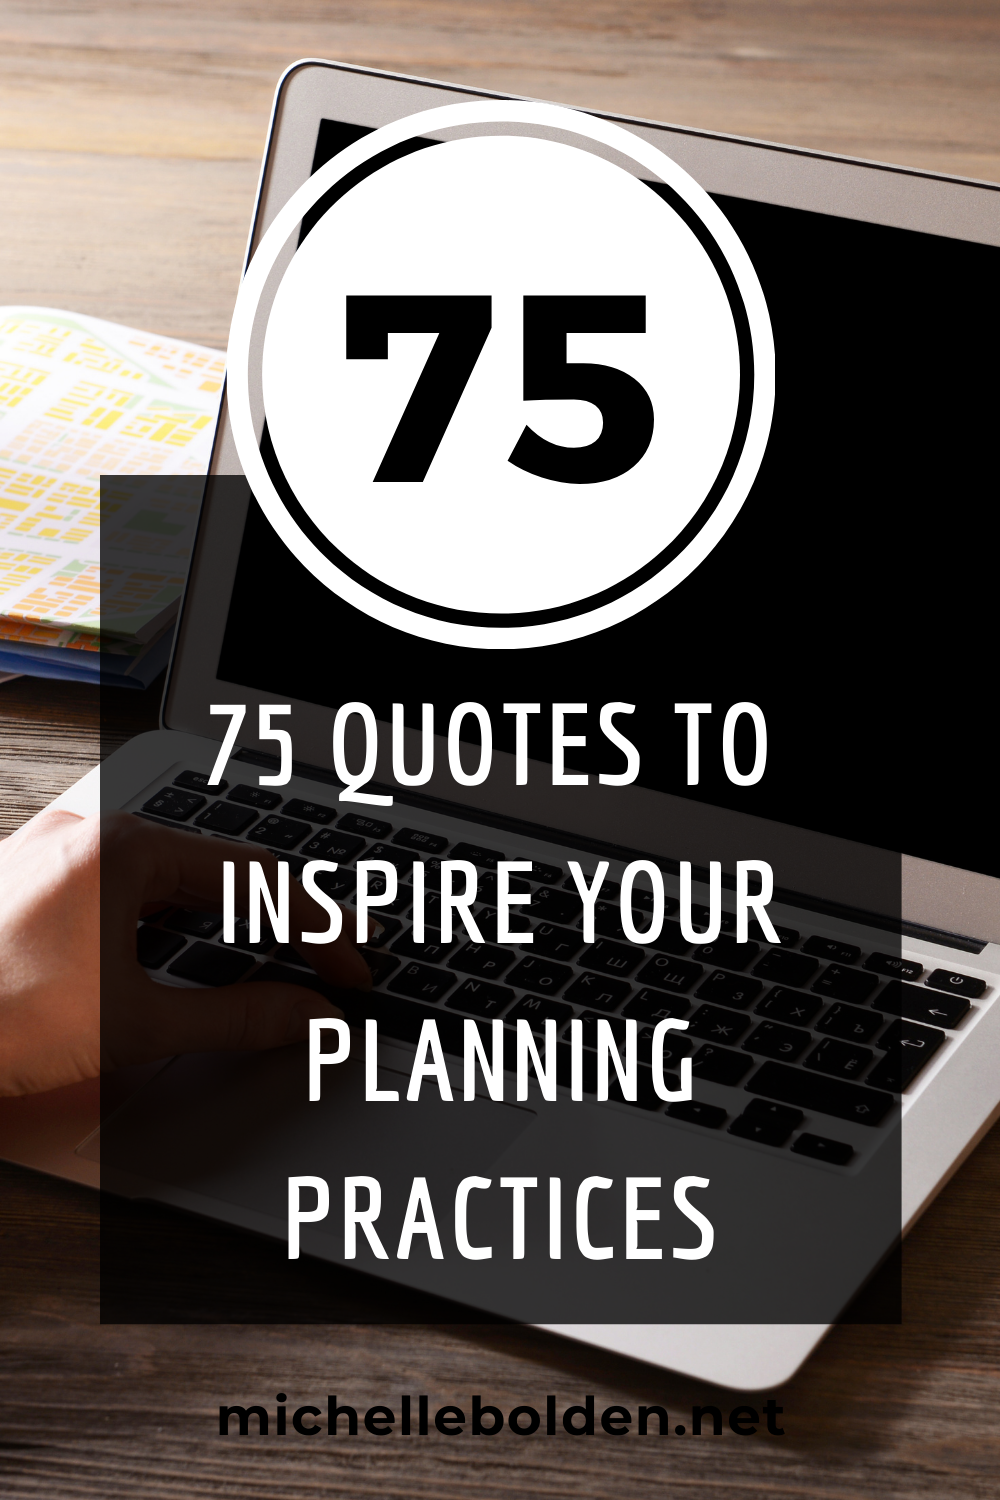 75 quotes to inspire your planning practices